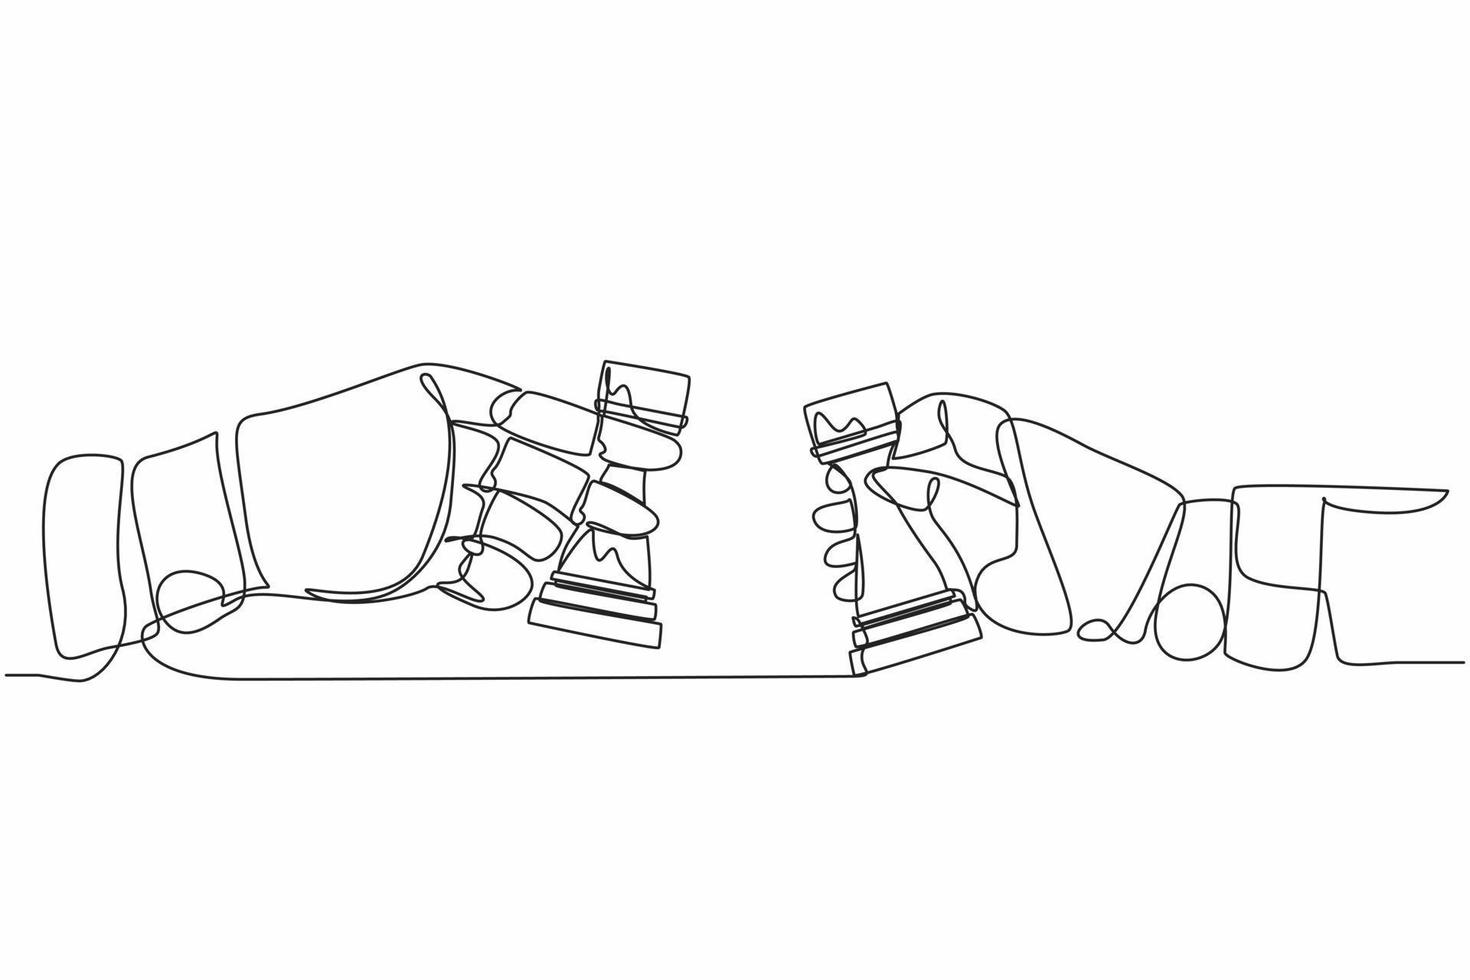 Single one line drawing robot hands holding rook chess piece and the other hand too. Future technology. Artificial intelligence and machine learning process. Continuous line draw design graphic vector